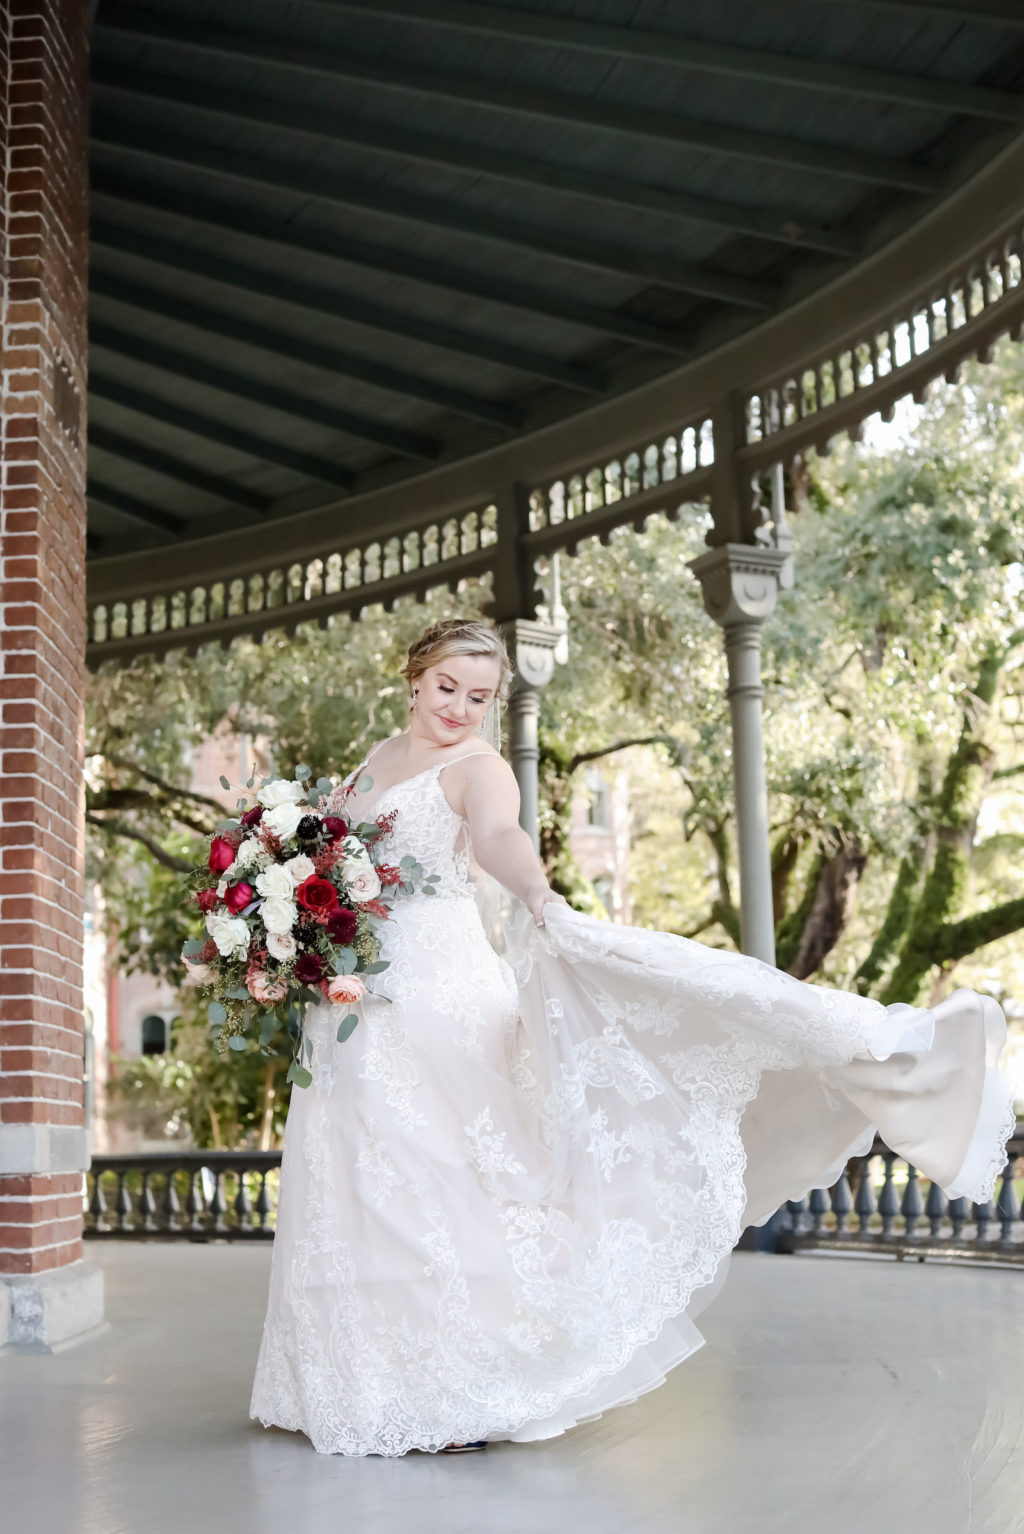 Romantic, Boho Whimsical Inspired Florida Bride in Wedding Dress at Historic University of Tampa UT, Kitty Chen Couture Pera Design, A-Line Ivory Lace Gown with Sultry Low-cut Back, Illusion Lace Fitted Bodice, Bohomeian All Natural Hair and Makeup Style with Braided Updo, Holding Romantic Cascading Rose Bridal Bouquet with Deep Red, Light Ivory, Pink and White Florals with Greenery | Tampa Bay Bridal Boutique CC's Bridal | Florida Wedding Photographer Lifelong Photography Studio | Tampa Heights Hair and Makeup Artist Femme Akoi Beauty | Downtown Tampa Wedding Transportation Skyline Limousine